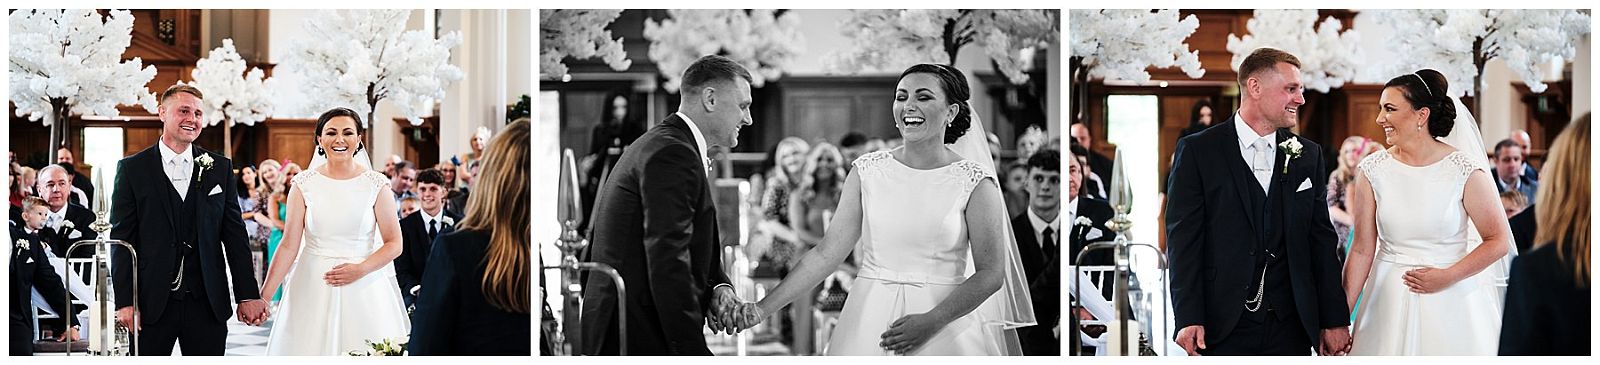 Beautiful moments as the bride and groom look at each other with laughter and love during the wedding ceremony at Hawkstone Hall in Shrewsbury by Documentary Wedding Photographer Stuart James